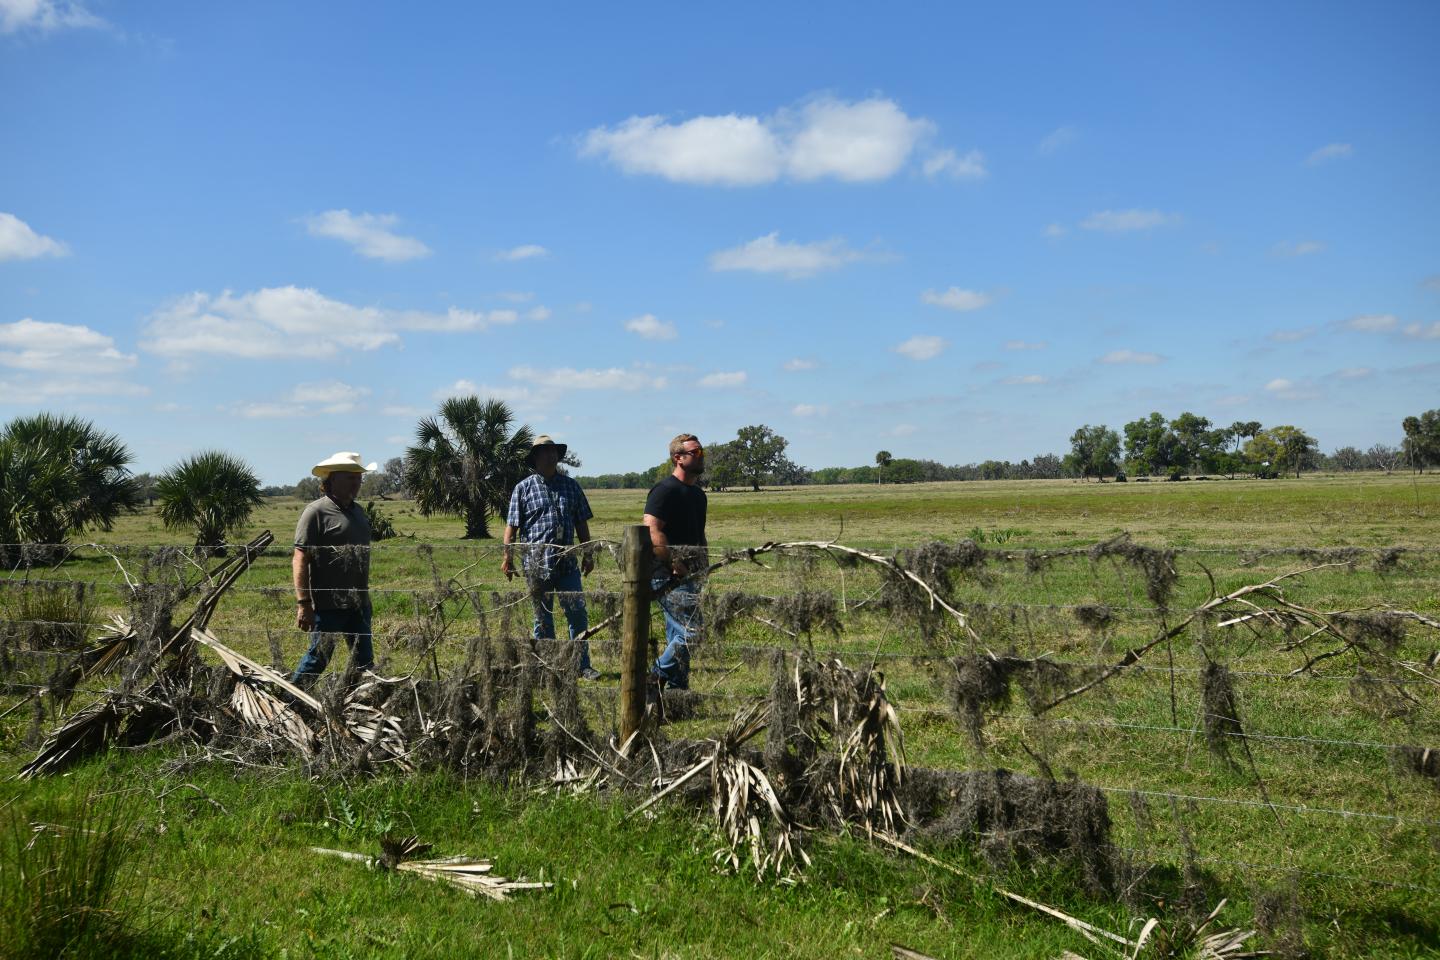 NRCS staff and landowner pick up debris off a fence on a cattle ranch in Wauchula, Florida.